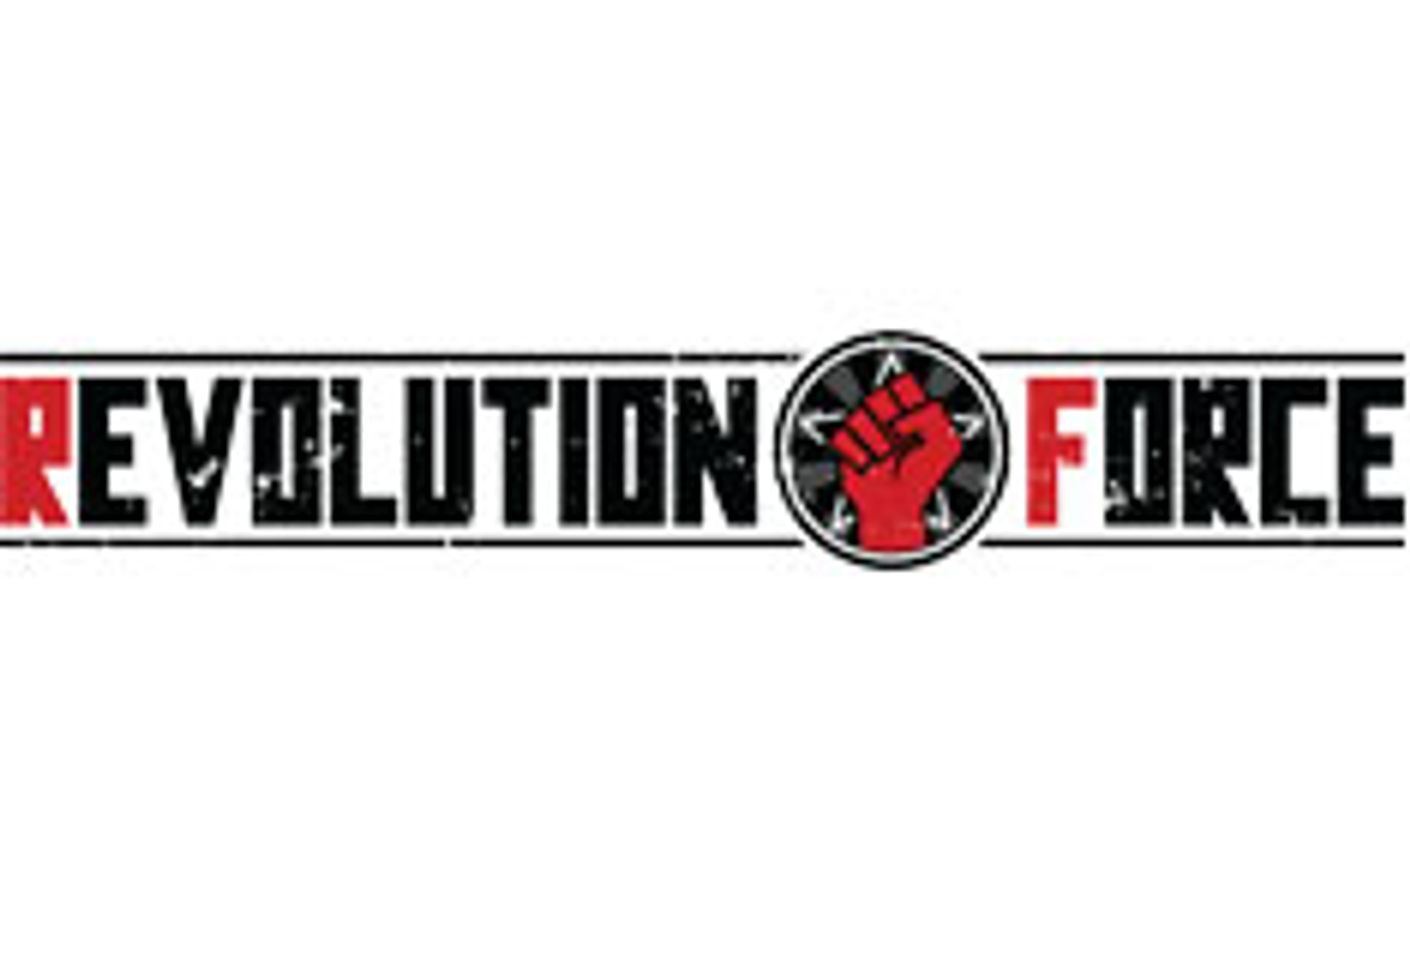 Revolution Force To Exclusively Run Cam4 Affiliate Program